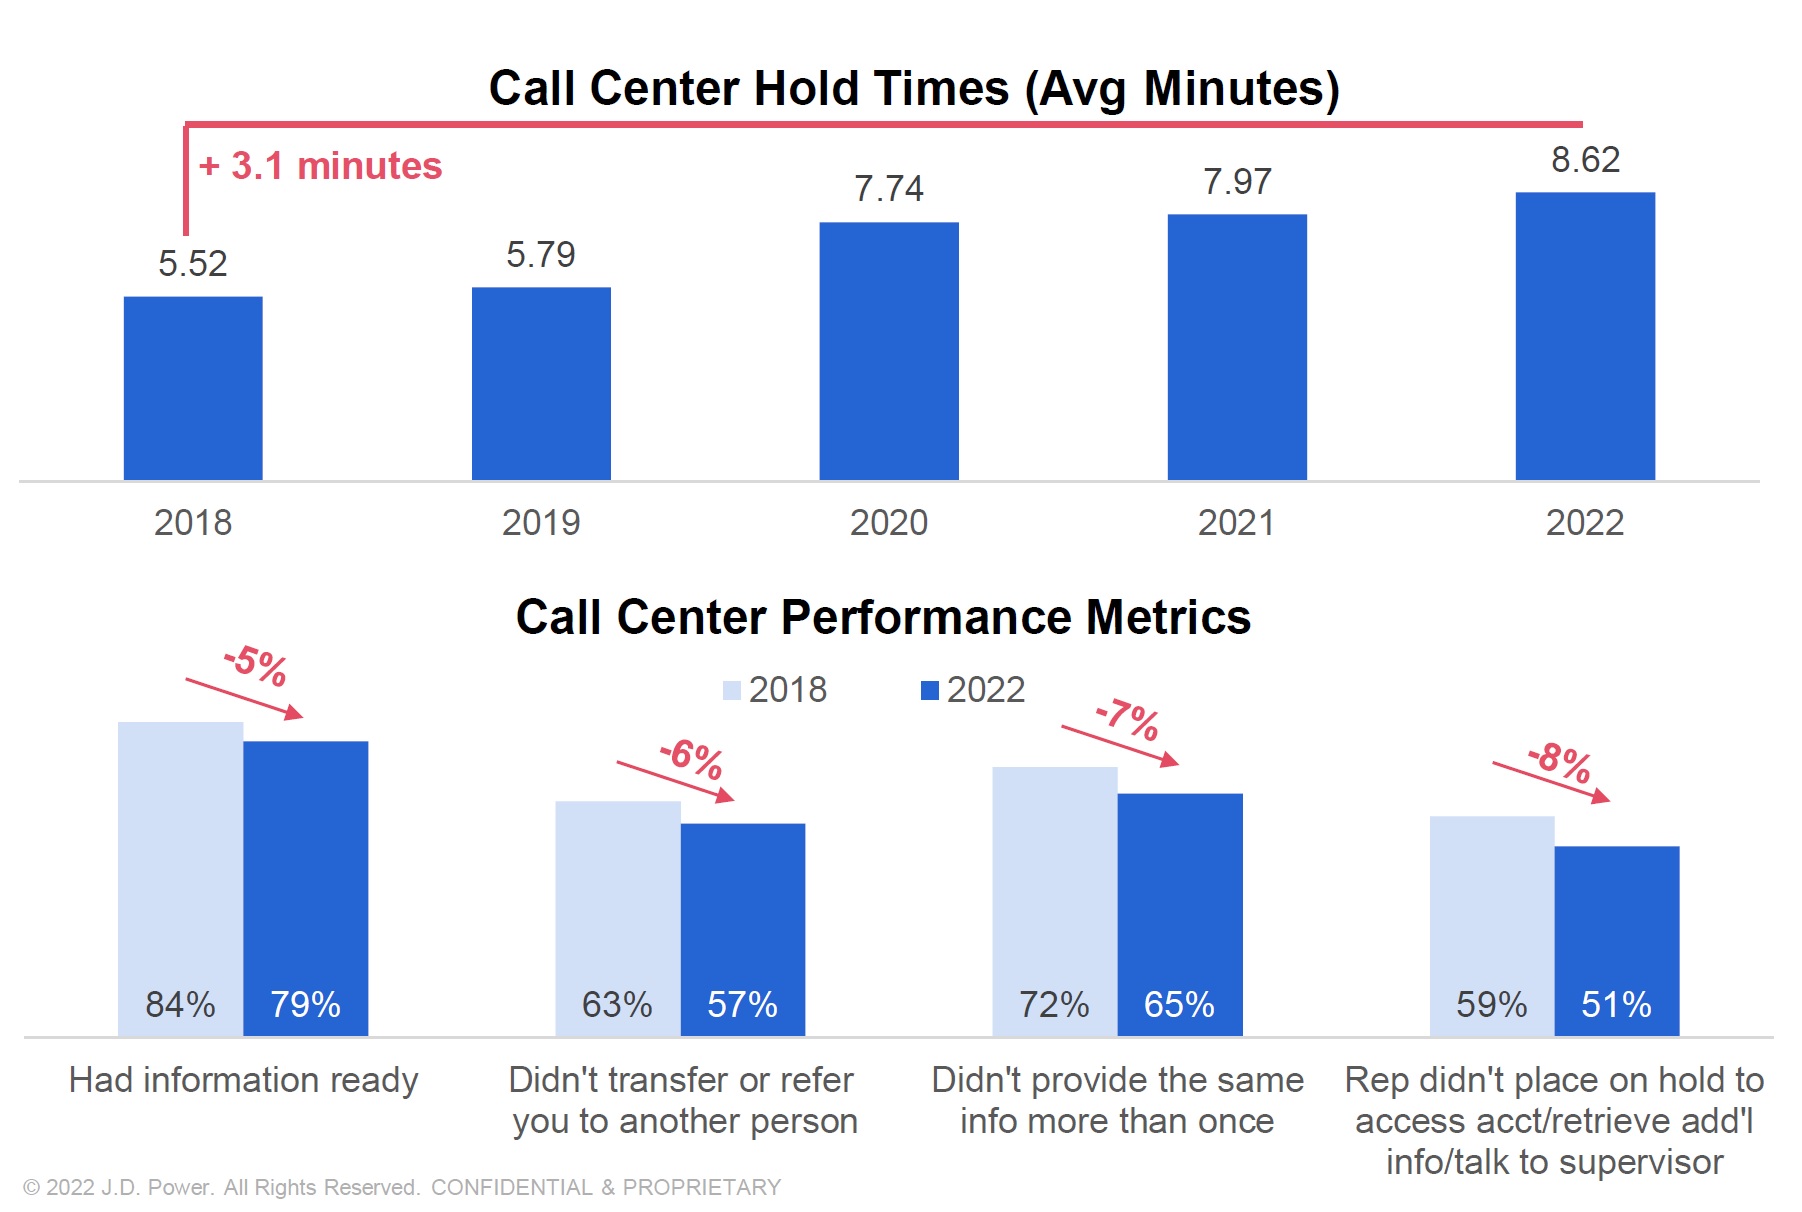 Call Center Hold Times (Average in Minutes) 
2018: 5.52
2019: 5.79
2020: 7.74
2021: 7.97
2022: 8.62

Call Center Performance Metrics 
1) Had Information Ready: 2018 (84%) 2022 (79%)
2) Didn't transfer or refer you to another person: 2018 (63%) 2022 (57%)
3) Didn't provide the same information more than once: 2018 (72%) 2022 (65%)
4) Rep didn't place on hold to access account or retrieve additional information or talk to supervisor: 2018 (59%) 2022 (51%)